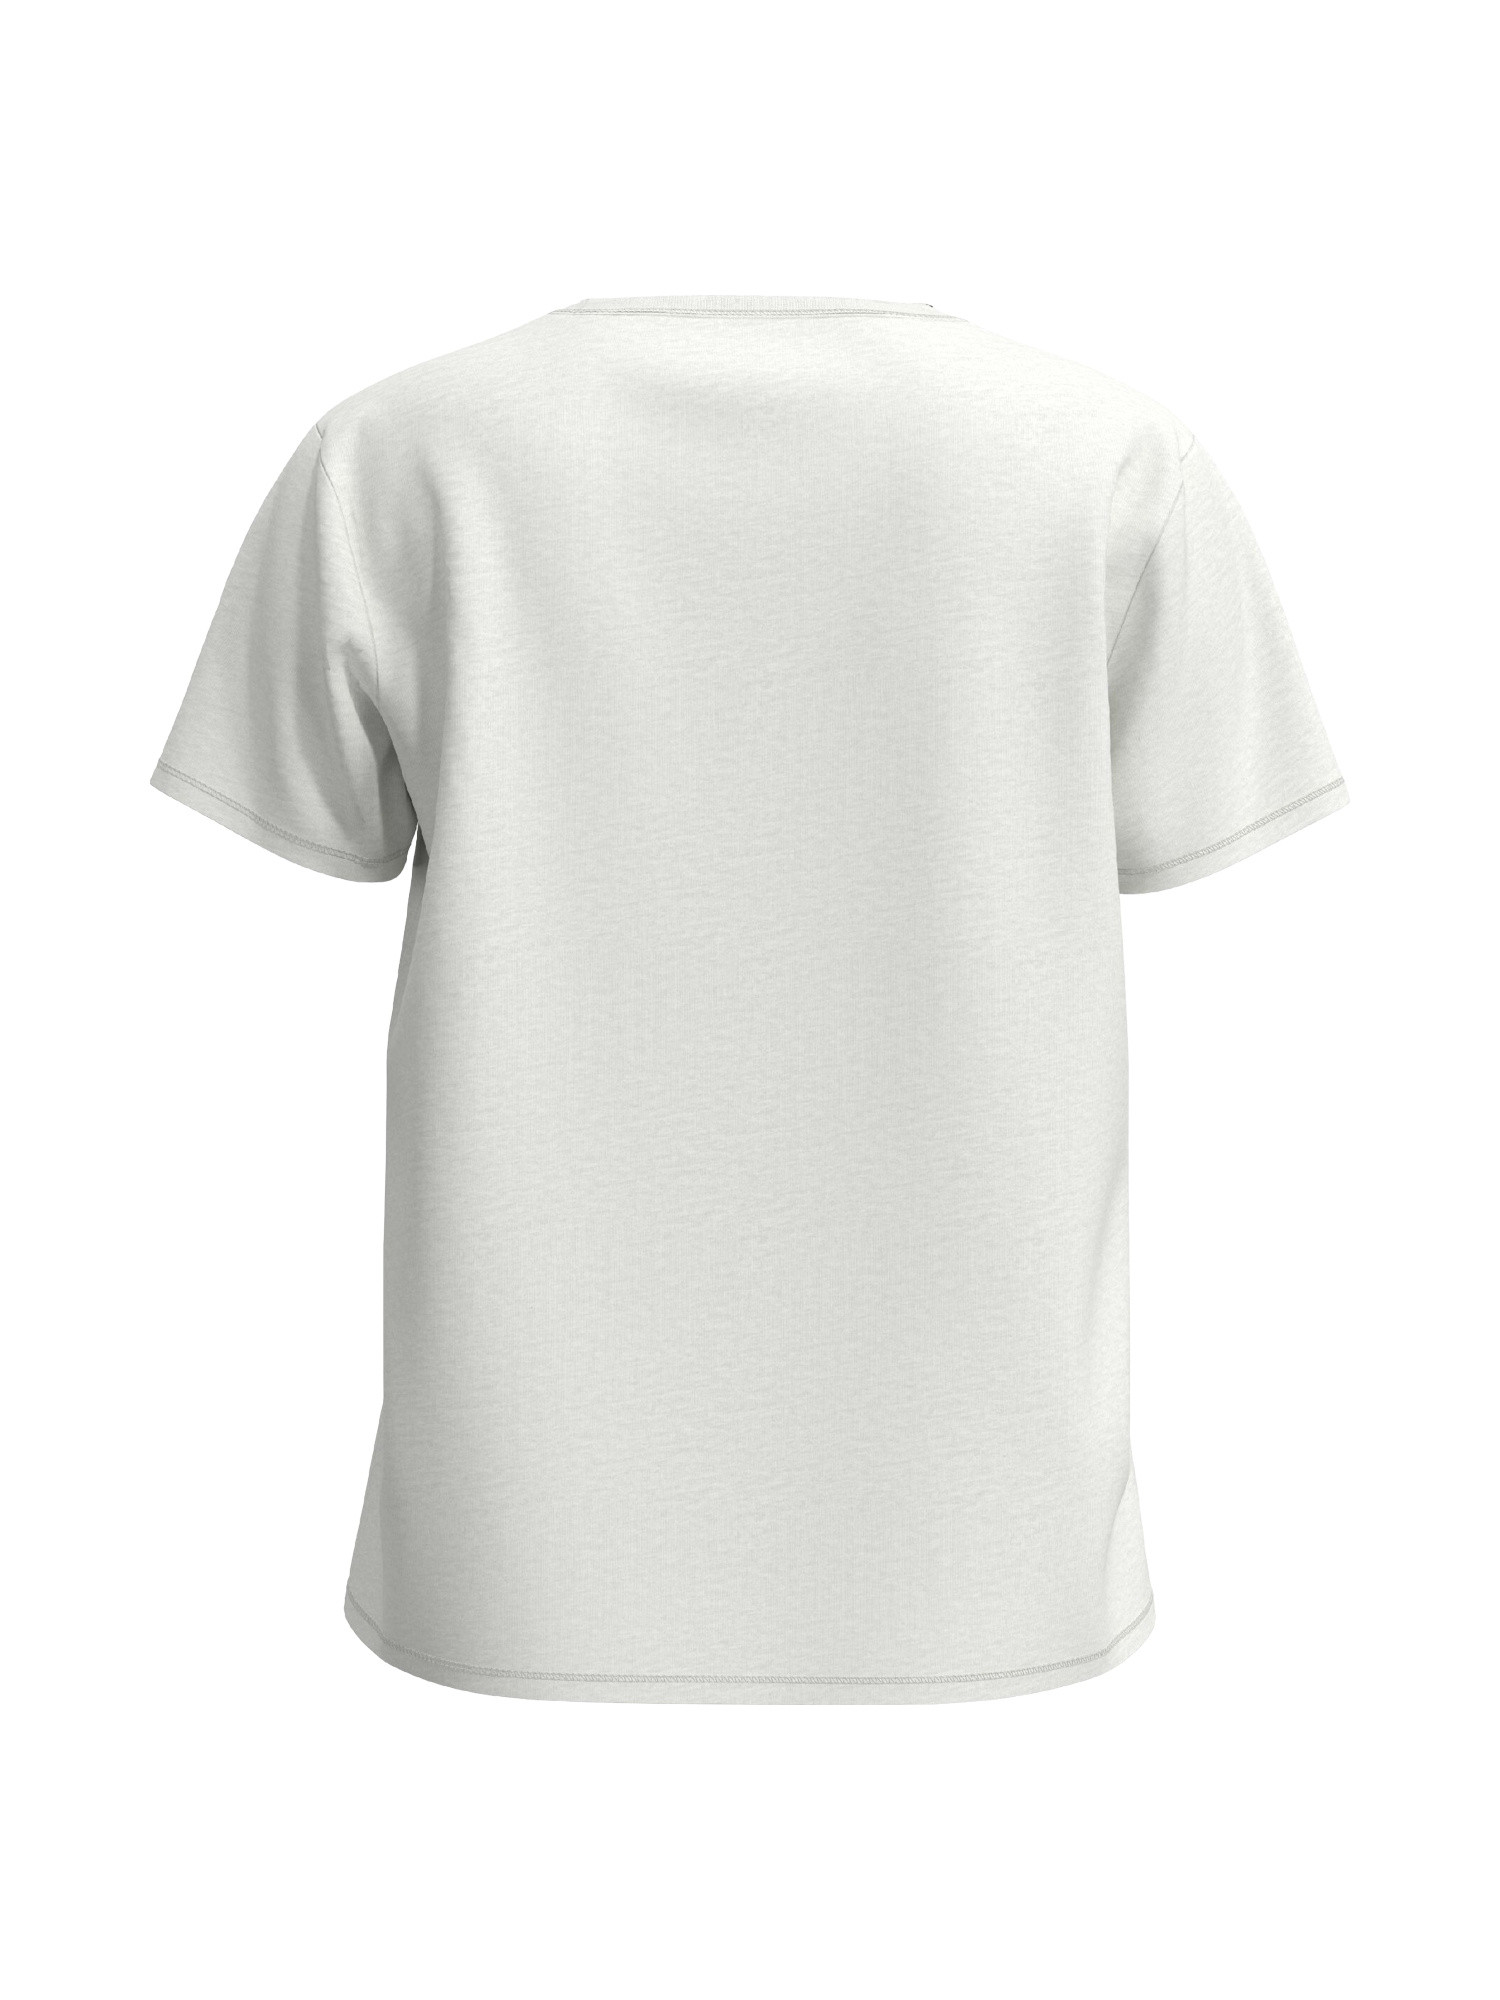 Pepe Jeans - T-shirt con stampa in cotone, Bianco, large image number 1